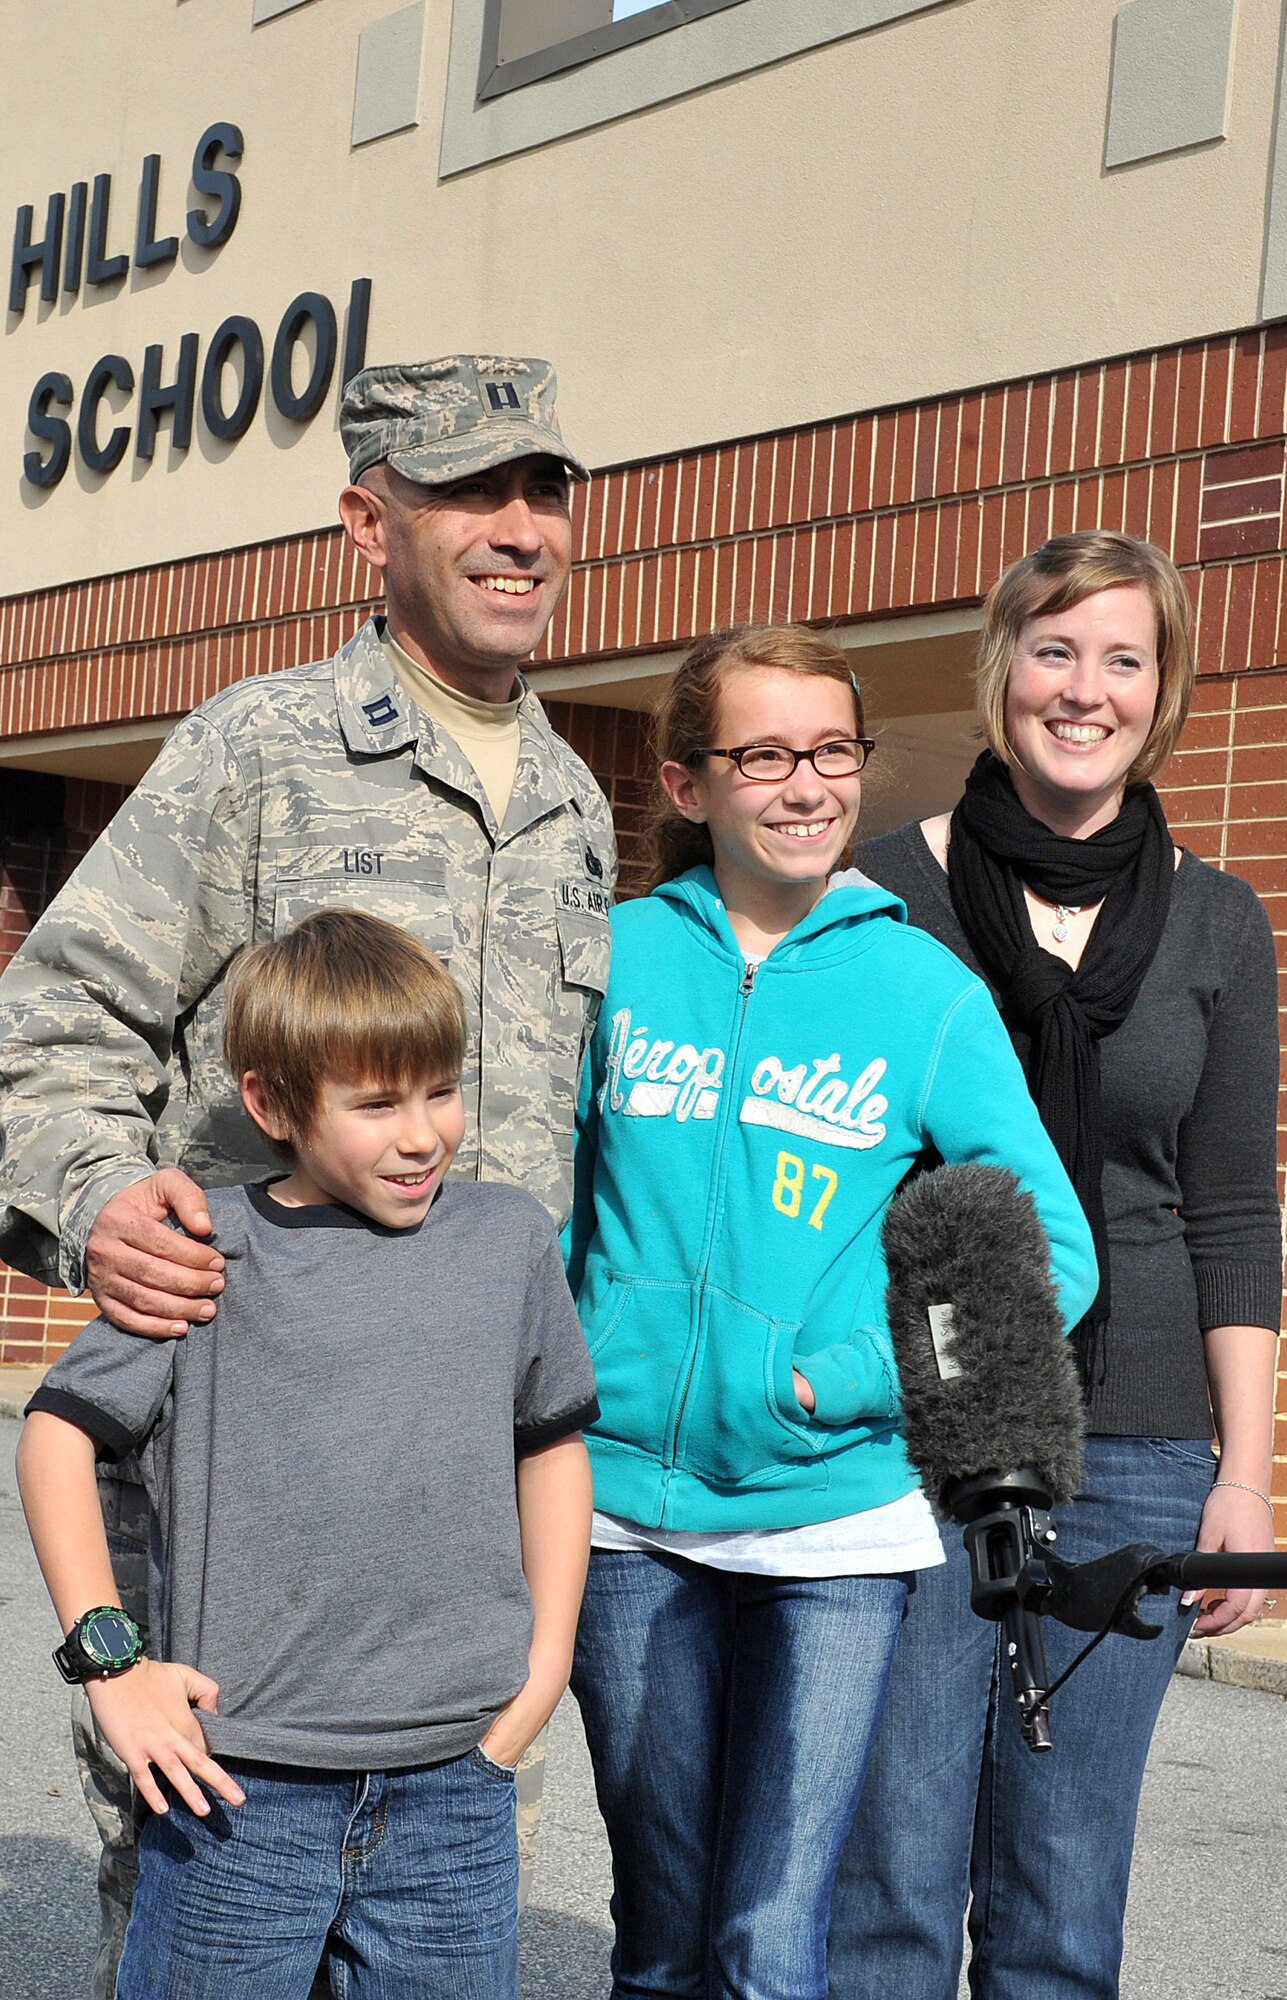 The List family was reunited Dec. 9 during two surprise welcome home events at Warner Robins Middle and Shirley Hills Elementary Schools. From left: James, Capt. Nathan List, Chloe, and Senior Master Sgt Lisa List. The captain ended his six-month deployment to Al Asad Air Base, Iraq, three weeks early, and with the help of his wife and the school staffs, was able to surprise his children in their classrooms. “It was a long road home,” said List. “Tuesday (Dec.  6) I was in Iraq and today I’m with my family. It’s a great feeling,” he said.  List is assigned to the Headquarters Air Force Reserve Command Security Forces Directorate as the Chief of Contingency and Readiness Plans.  Sergeant List is also assigned to the AFRC Judge Advocate directorate as the Reserve Paralegal Program Manager. (U.S. Air Force photo/Tommie Horton)